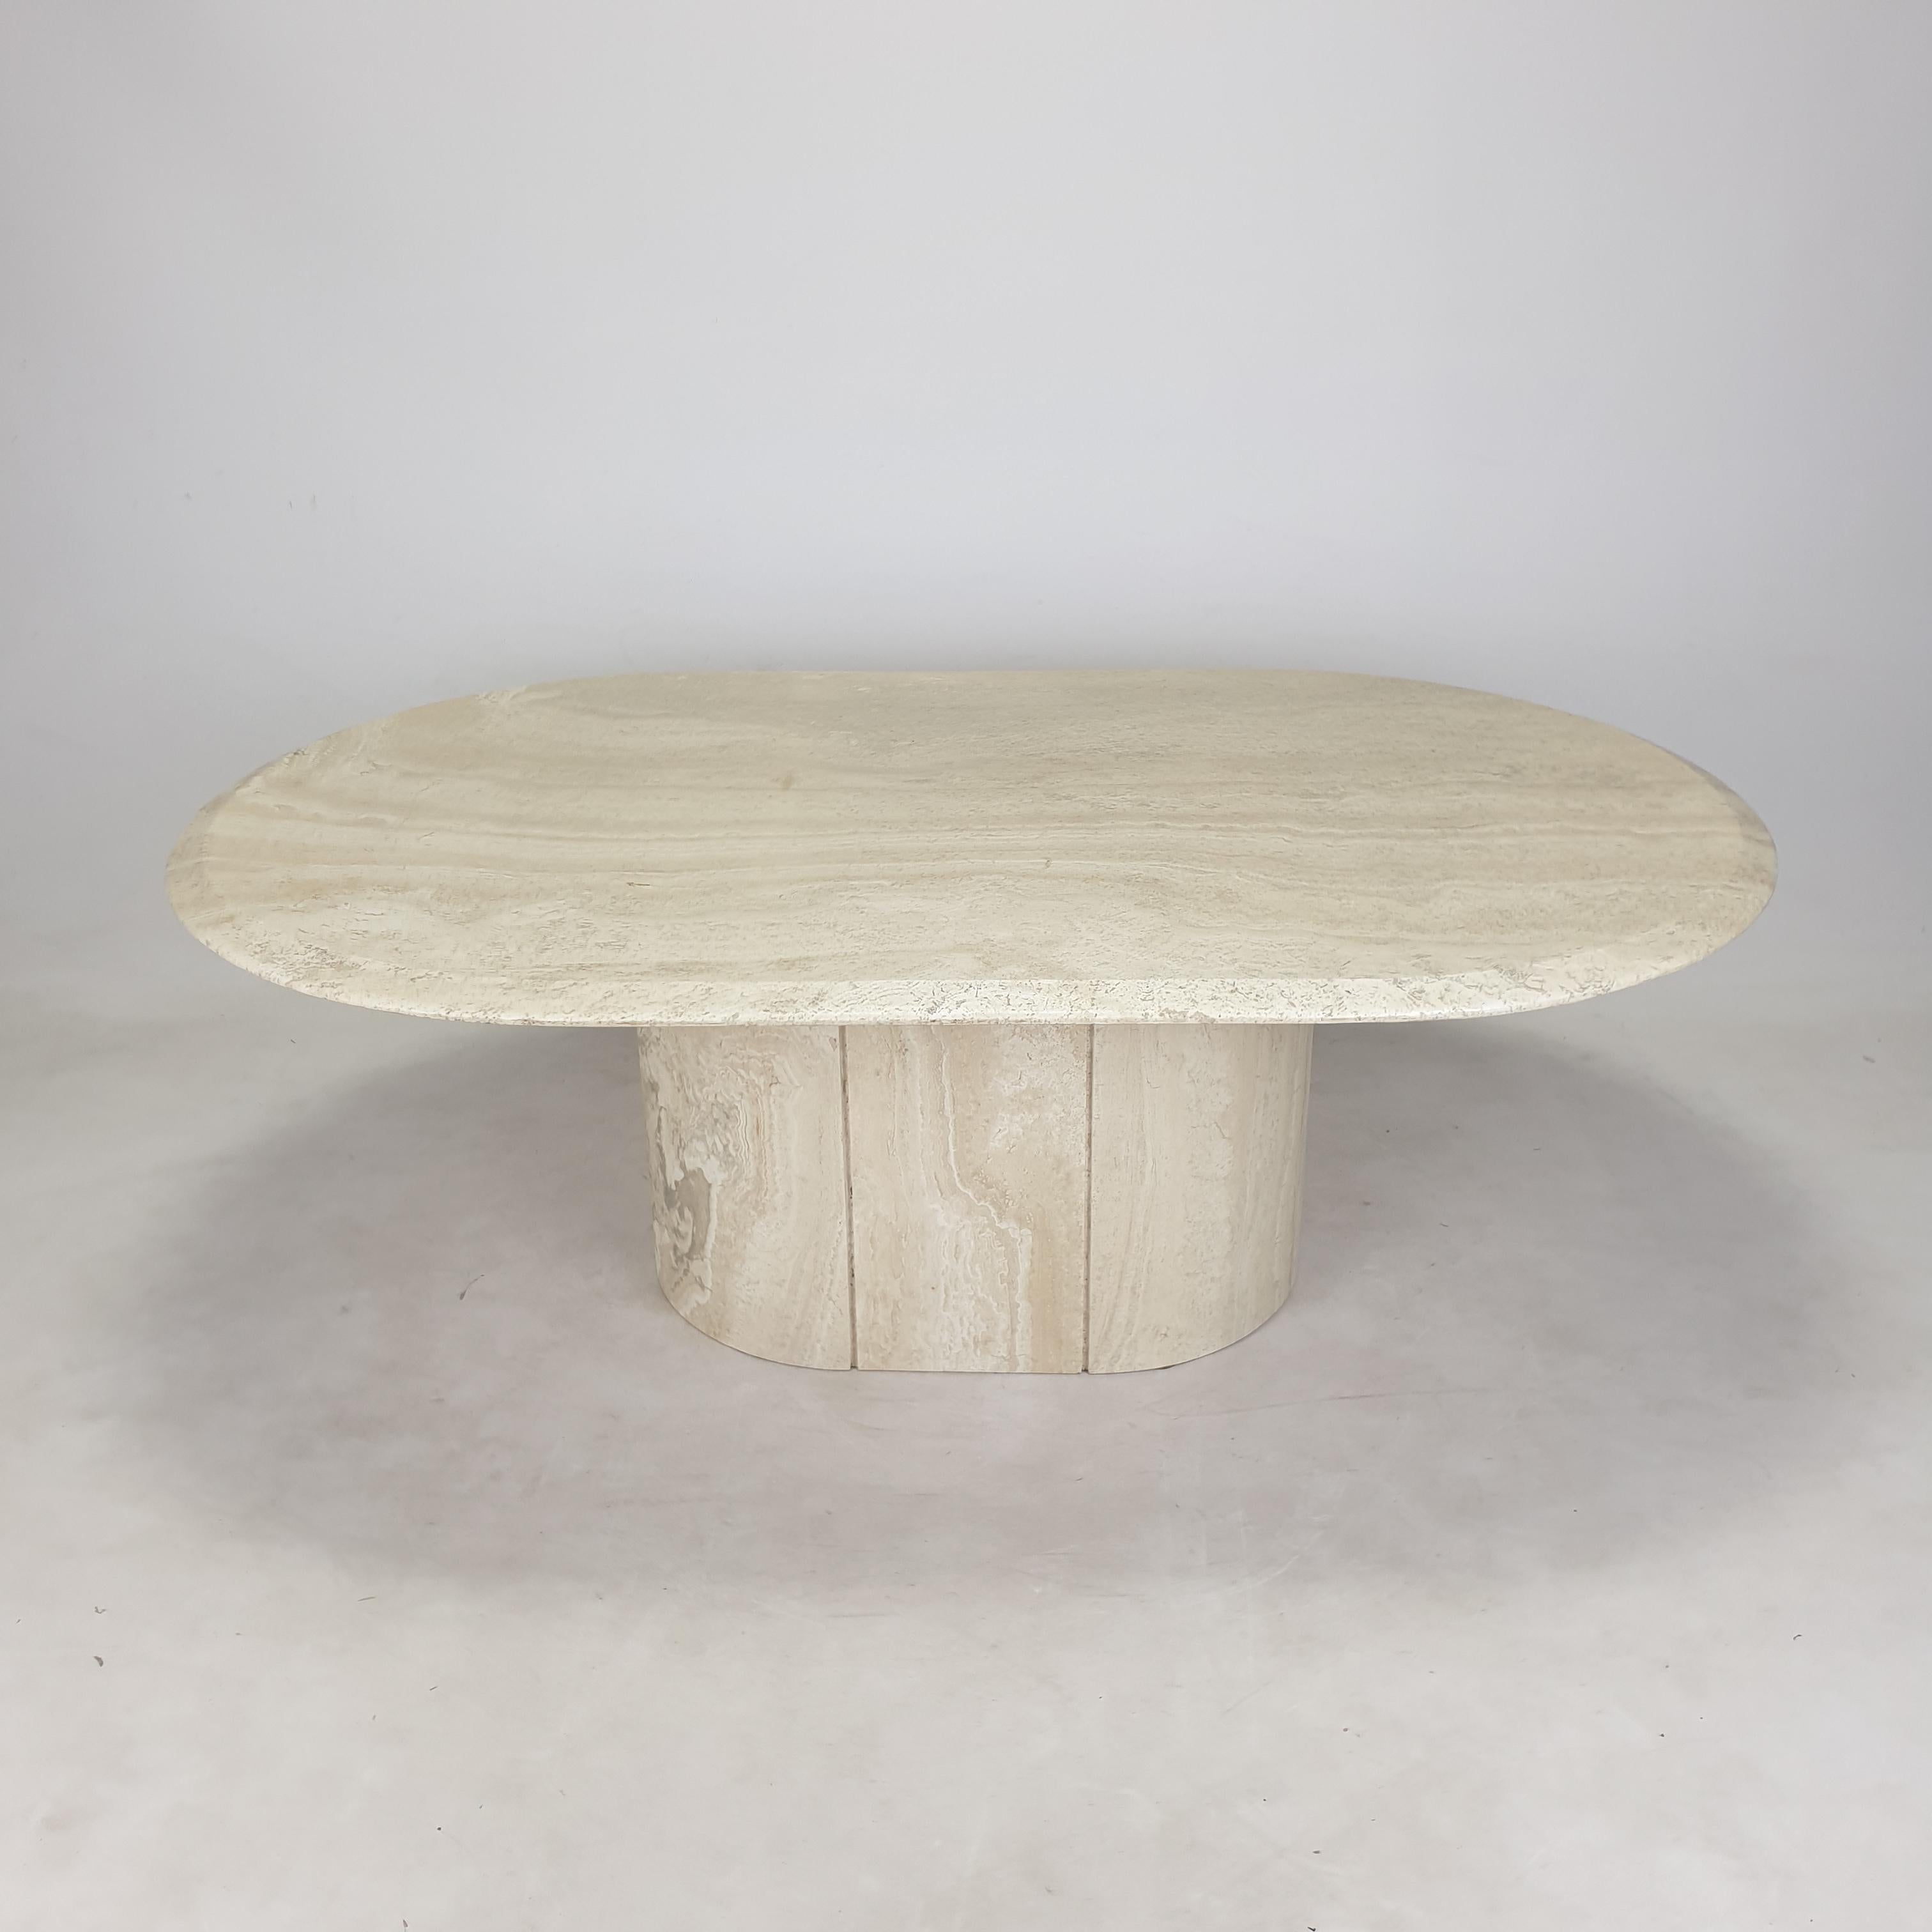 Very beautiful Italian coffee table from 1984, handcrafted out of travertine. 

The oval plate and the oval base are made of very nice travertine.